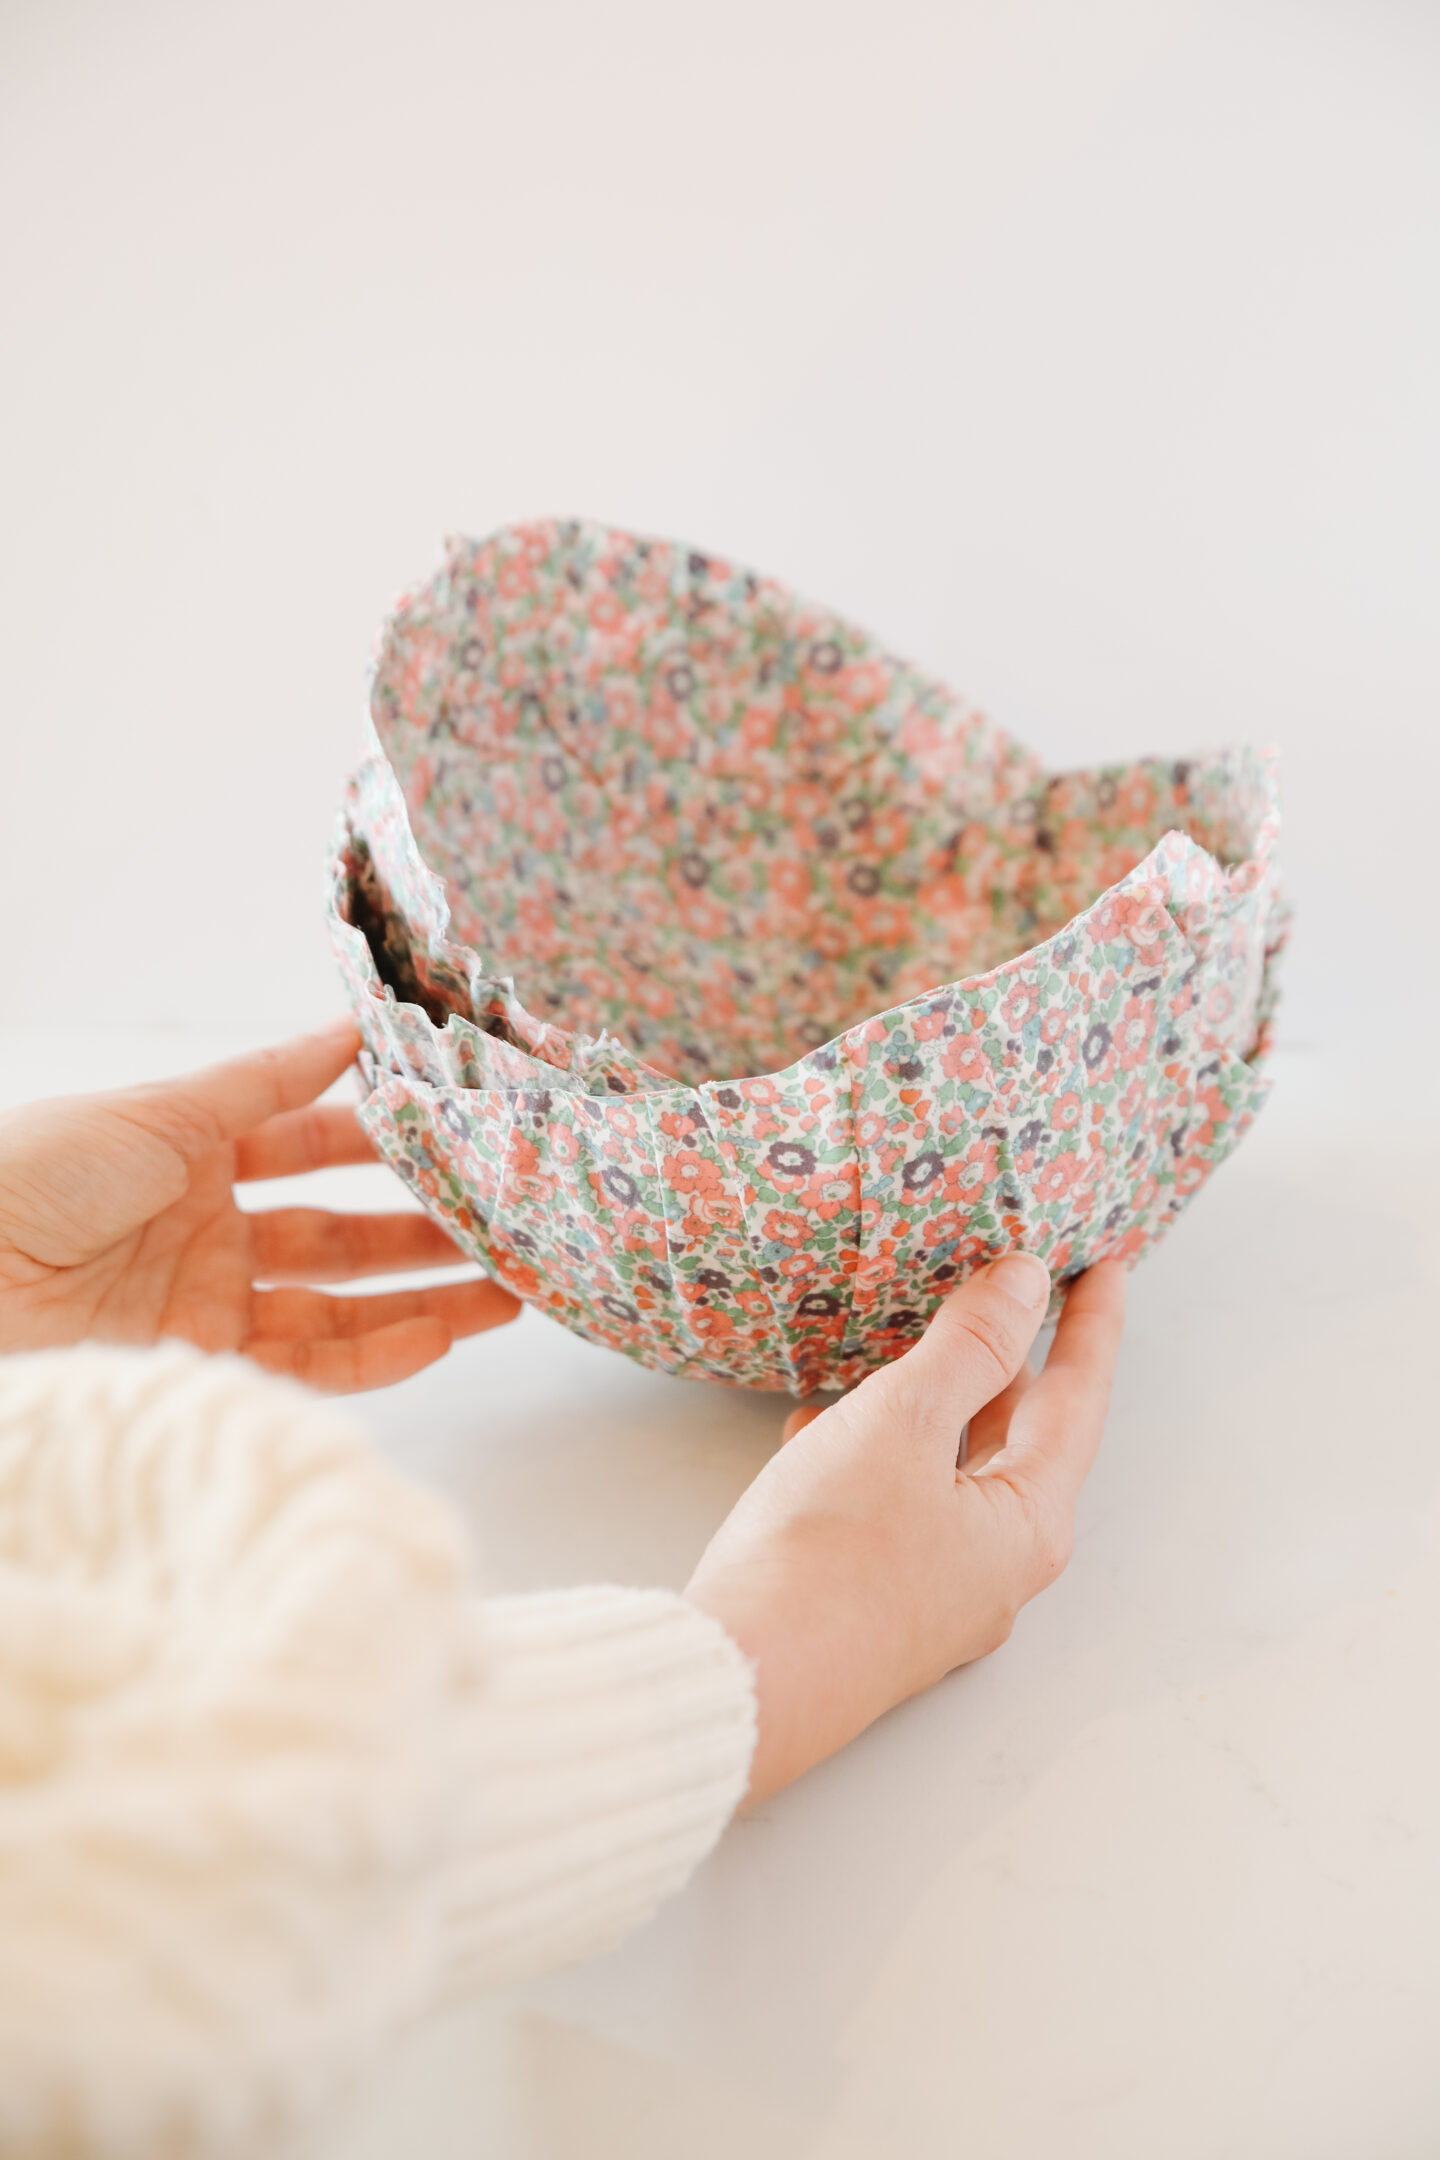 Let's Learn How to Papier-Mâché With Fabric & Make The Prettiest